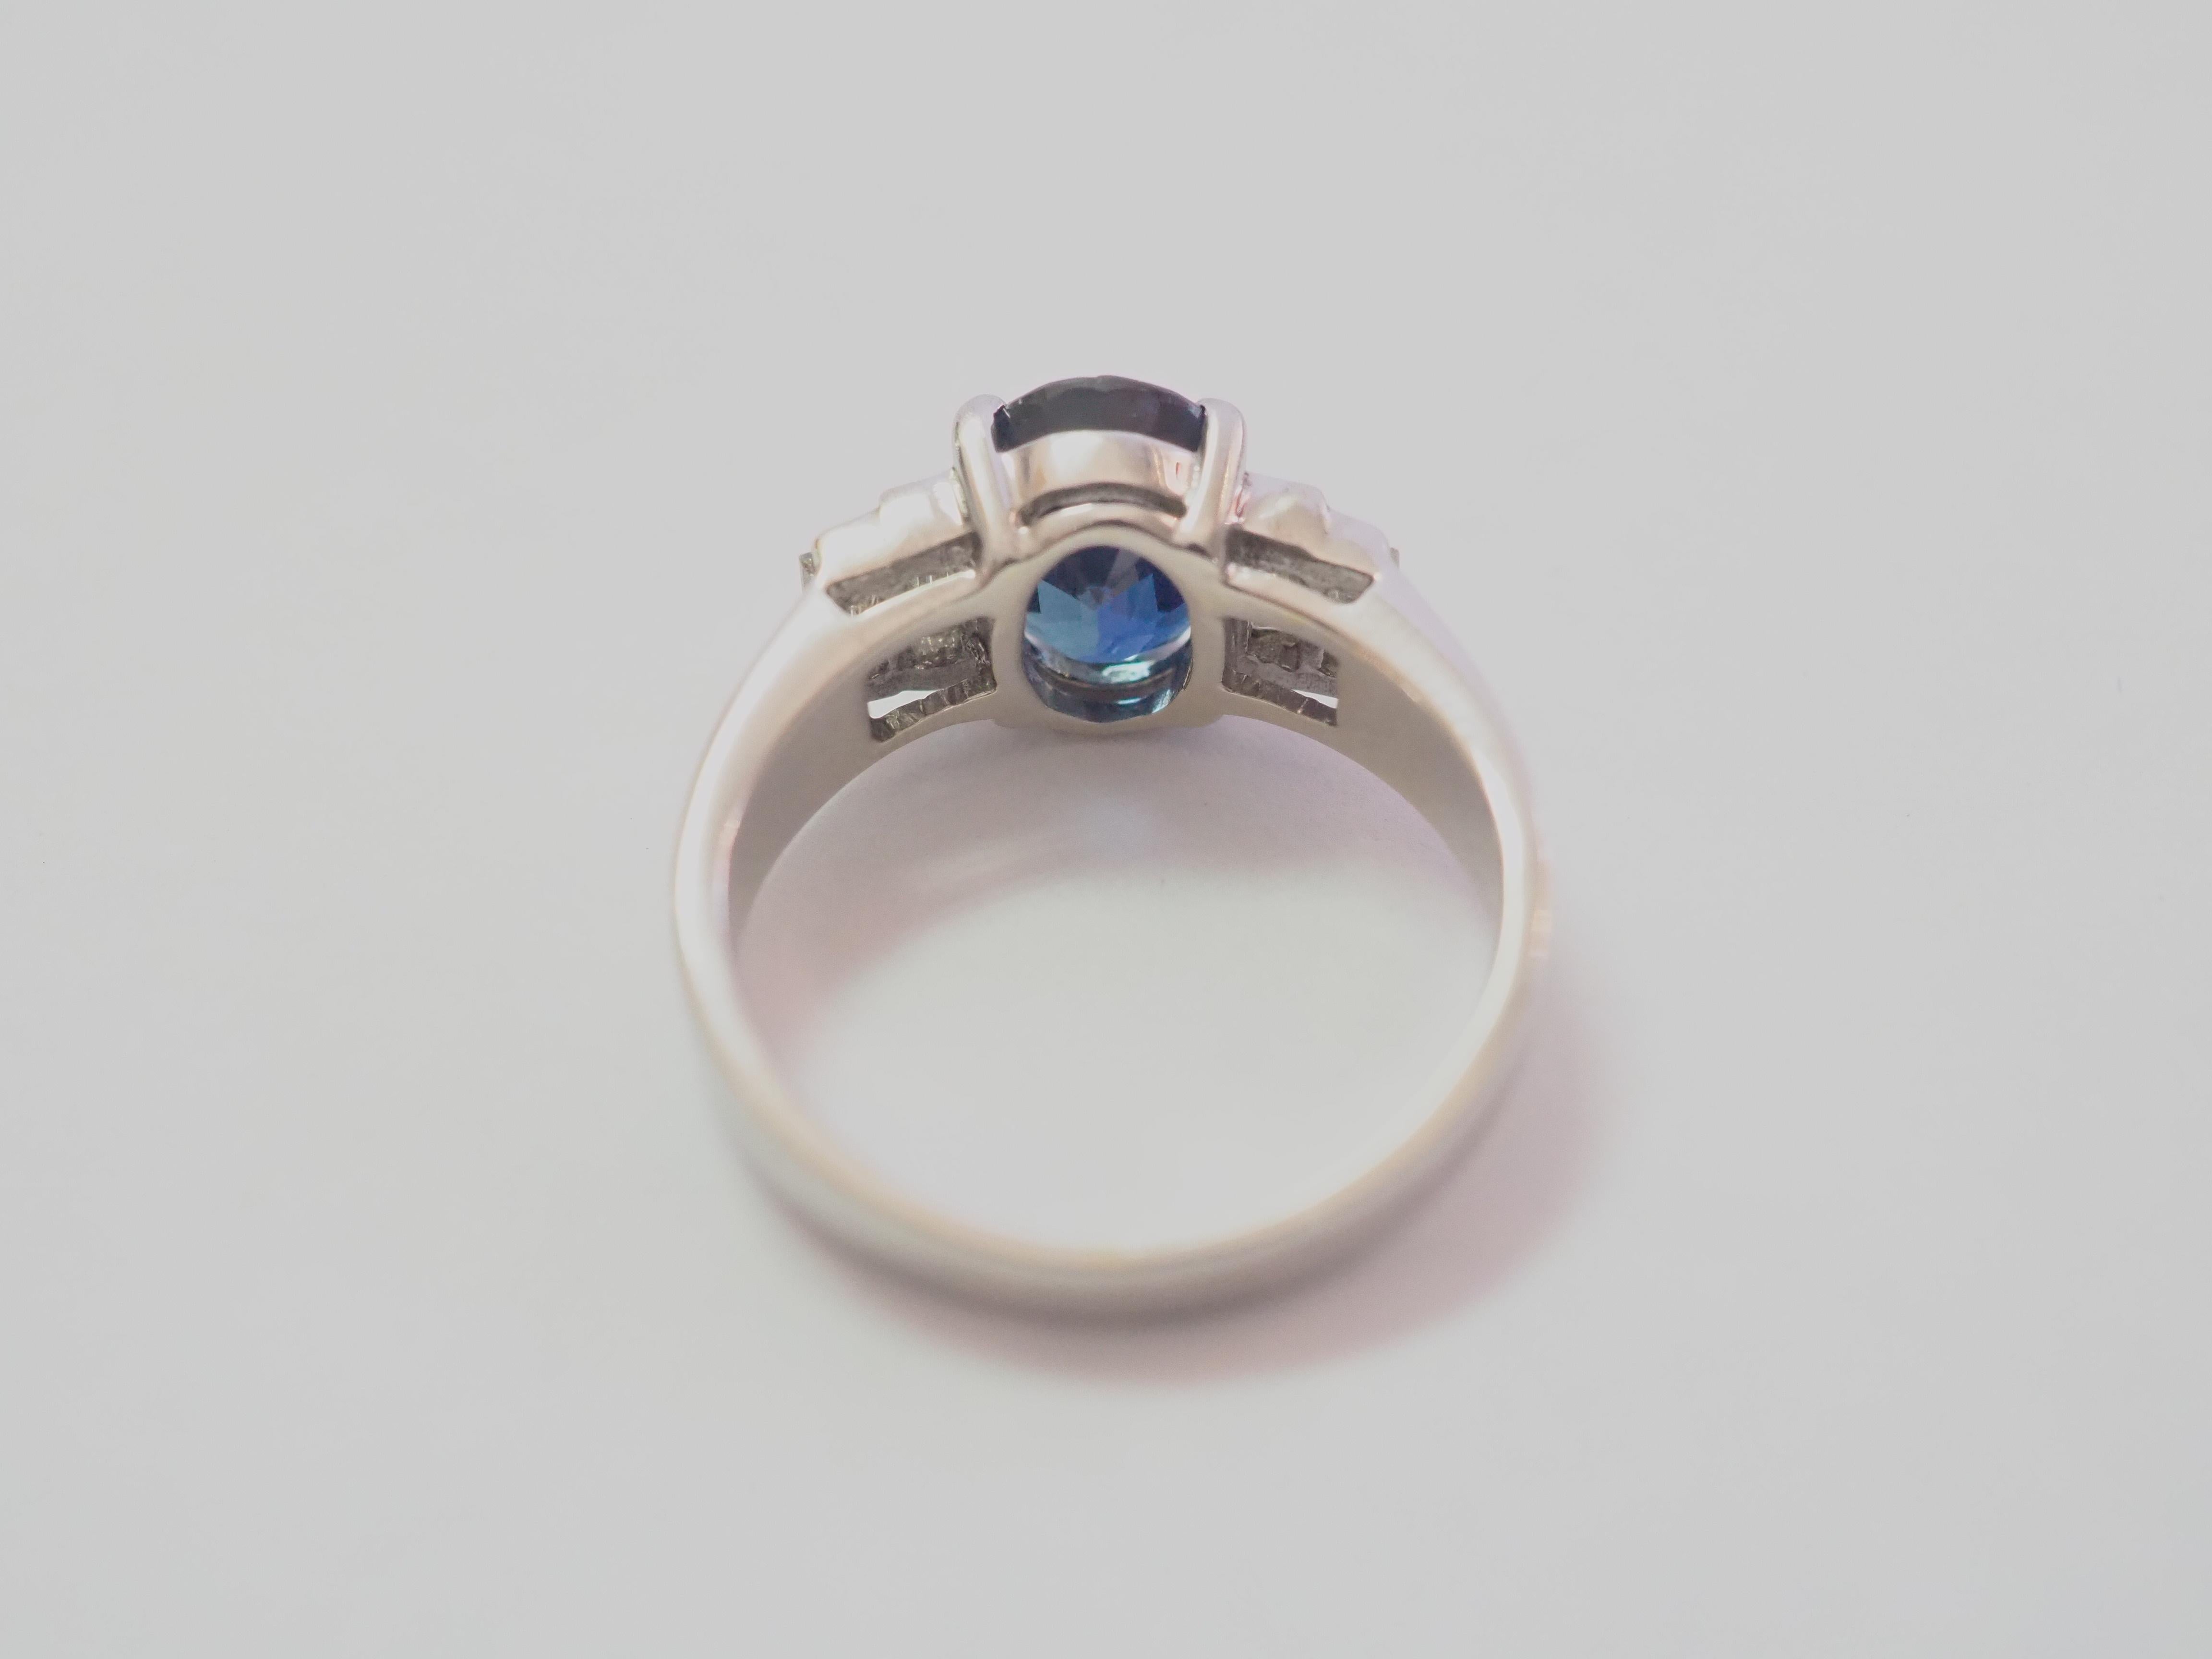 18K White Gold 2.10ct Blue Sapphire & 0.42ct Diamond Engagement Ring In Excellent Condition For Sale In เกาะสมุย, TH